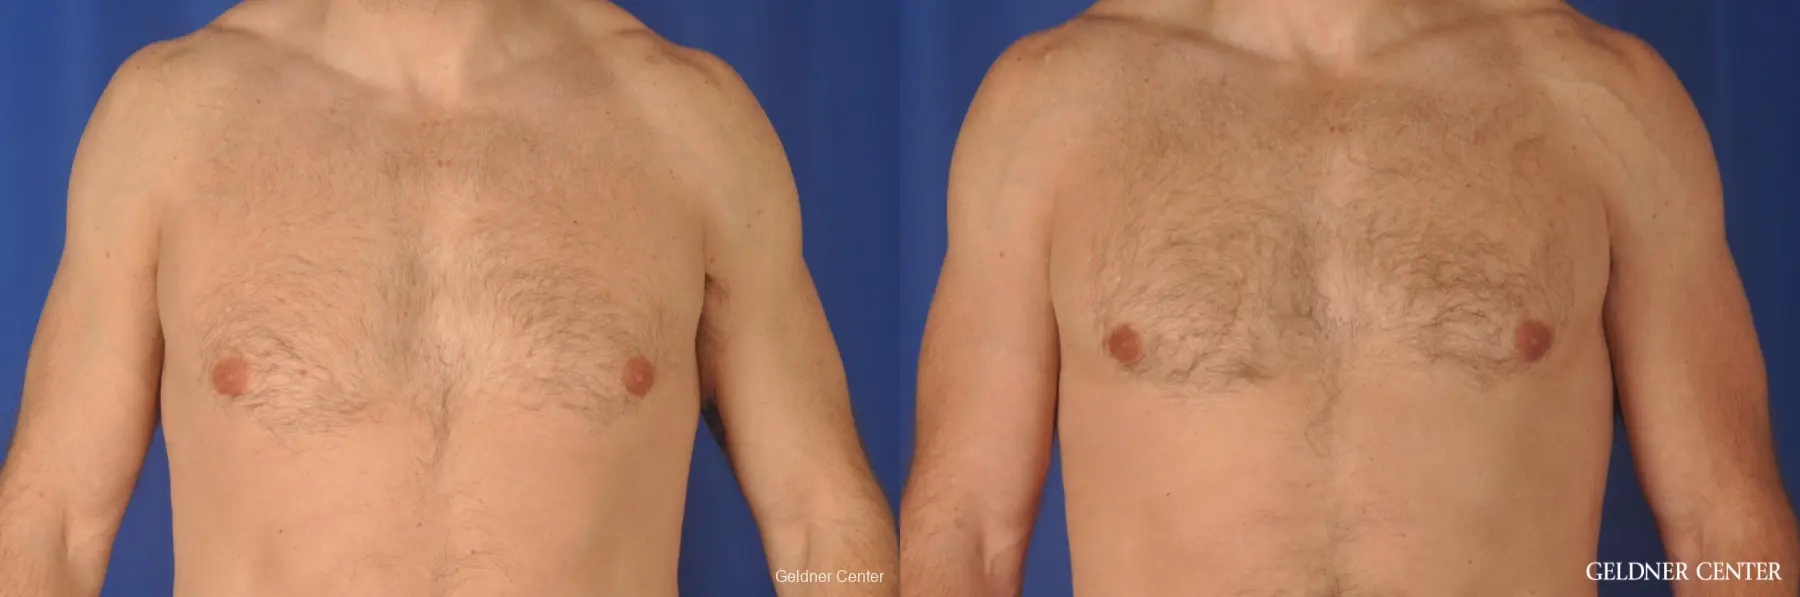 Gynecomastia: Patient 9 - Before and After 1